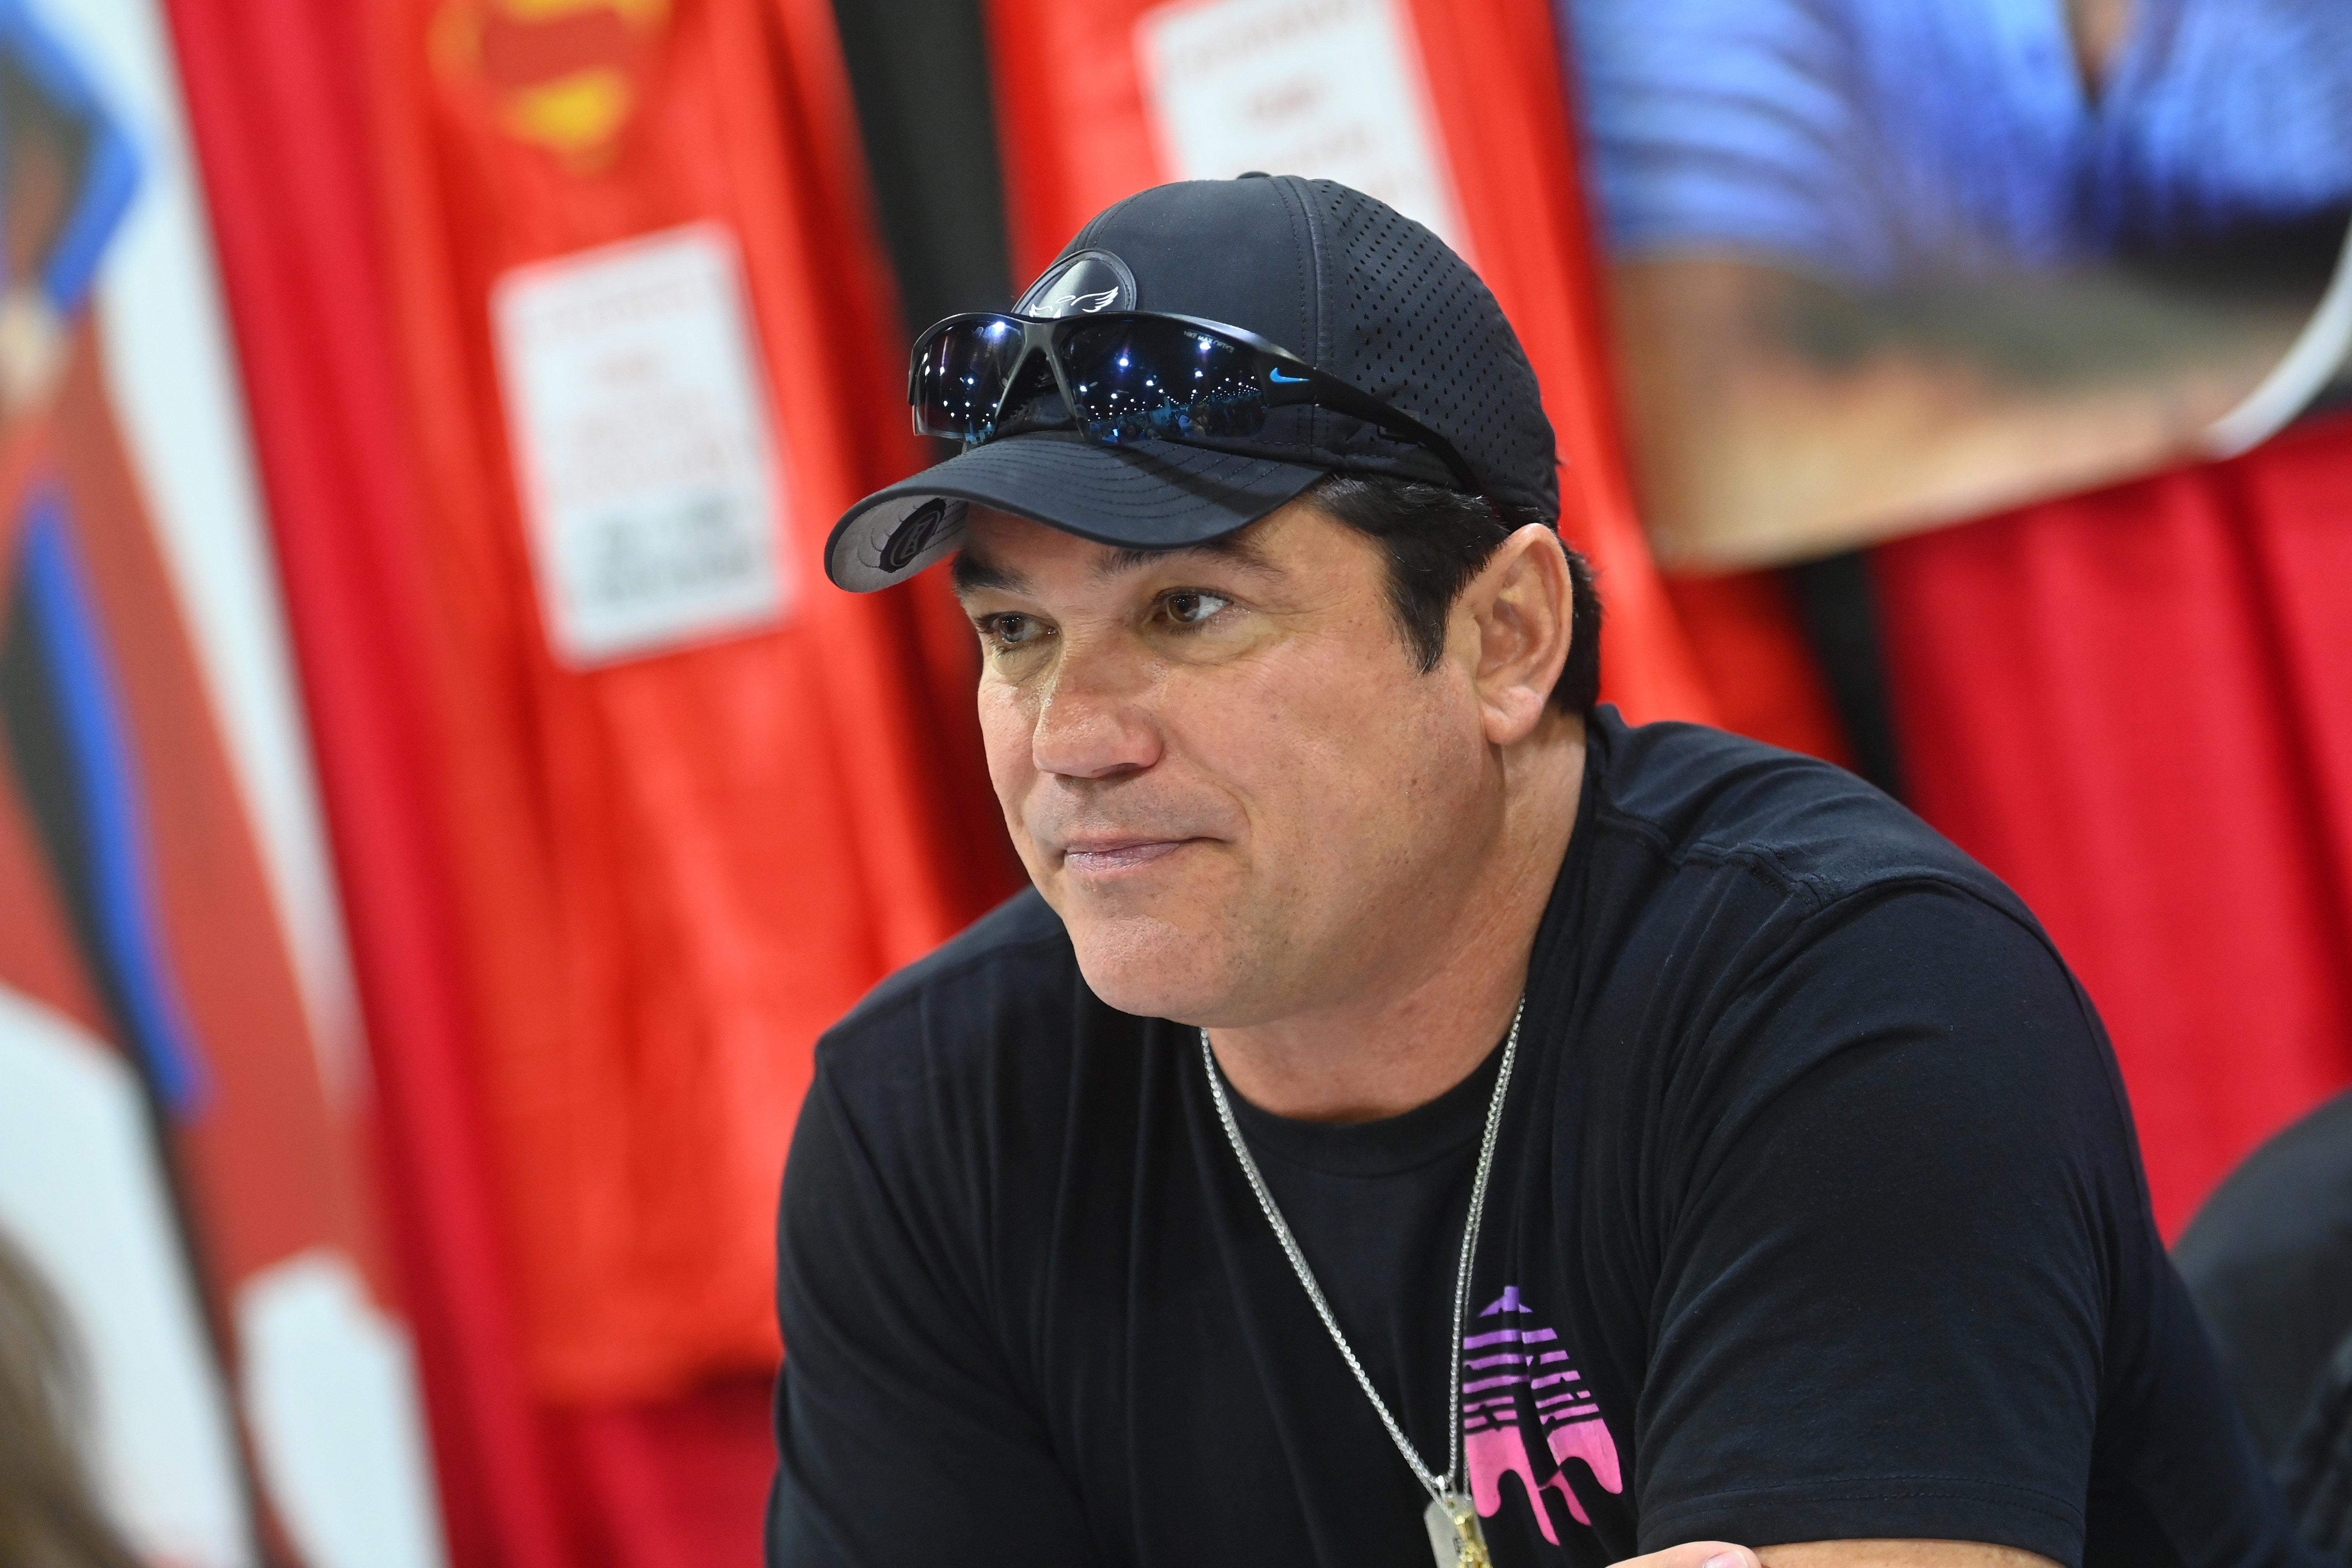 Dean Cain attends the 2022 Fandemic Tour at Georgia World Congress Center on March 19, 2022, in Atlanta, Georgia. | Source: Getty Images